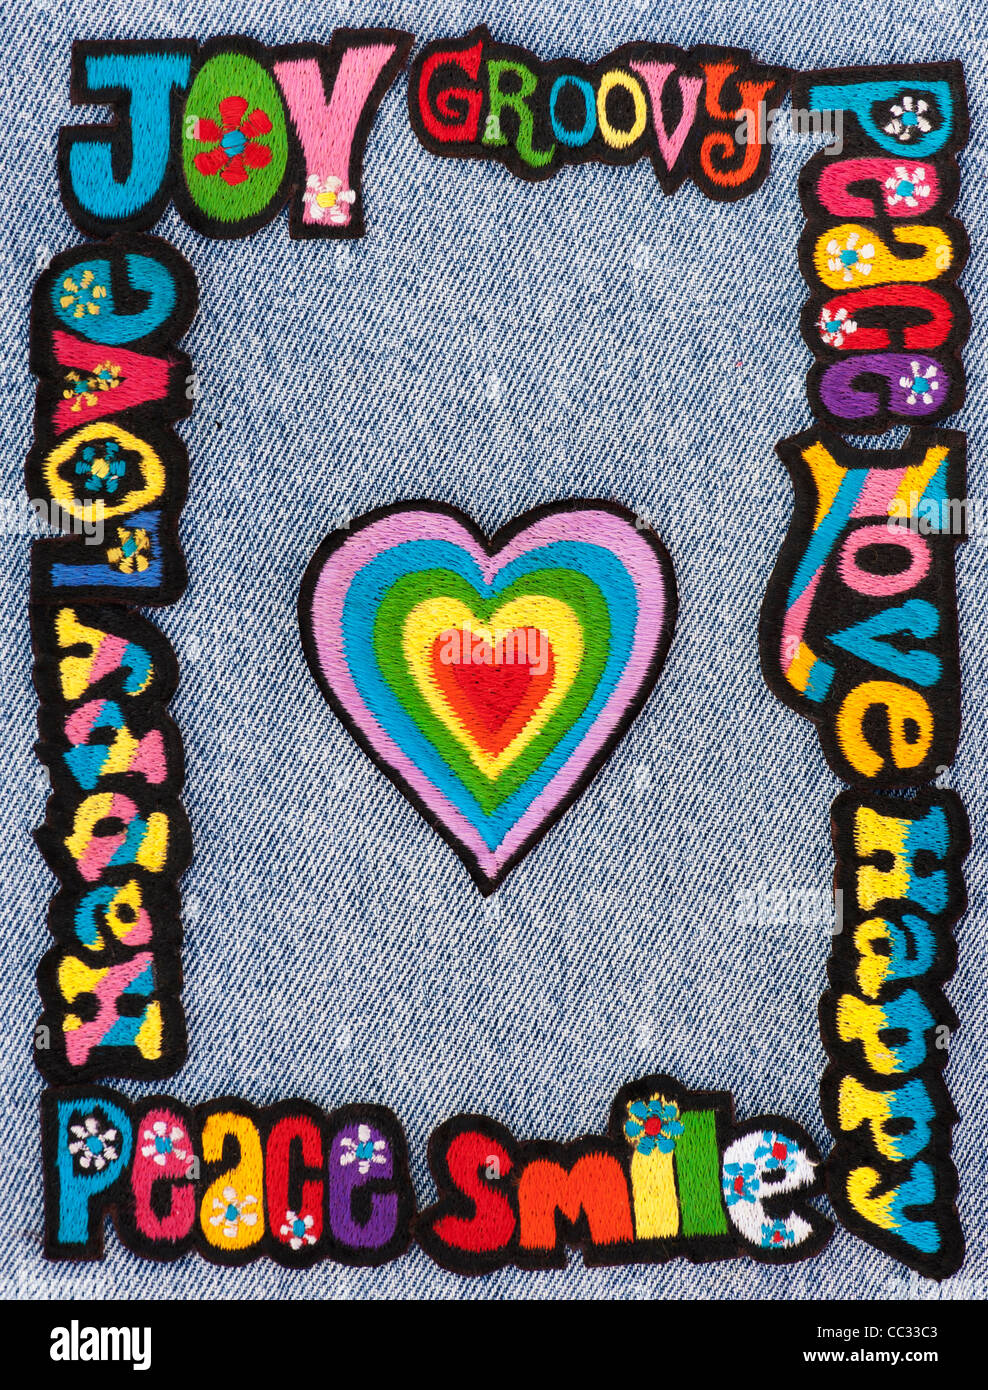 Embroidery iron on patches of Multicoloured Love, Peace, Happy words with hearts on a denim jean background Stock Photo